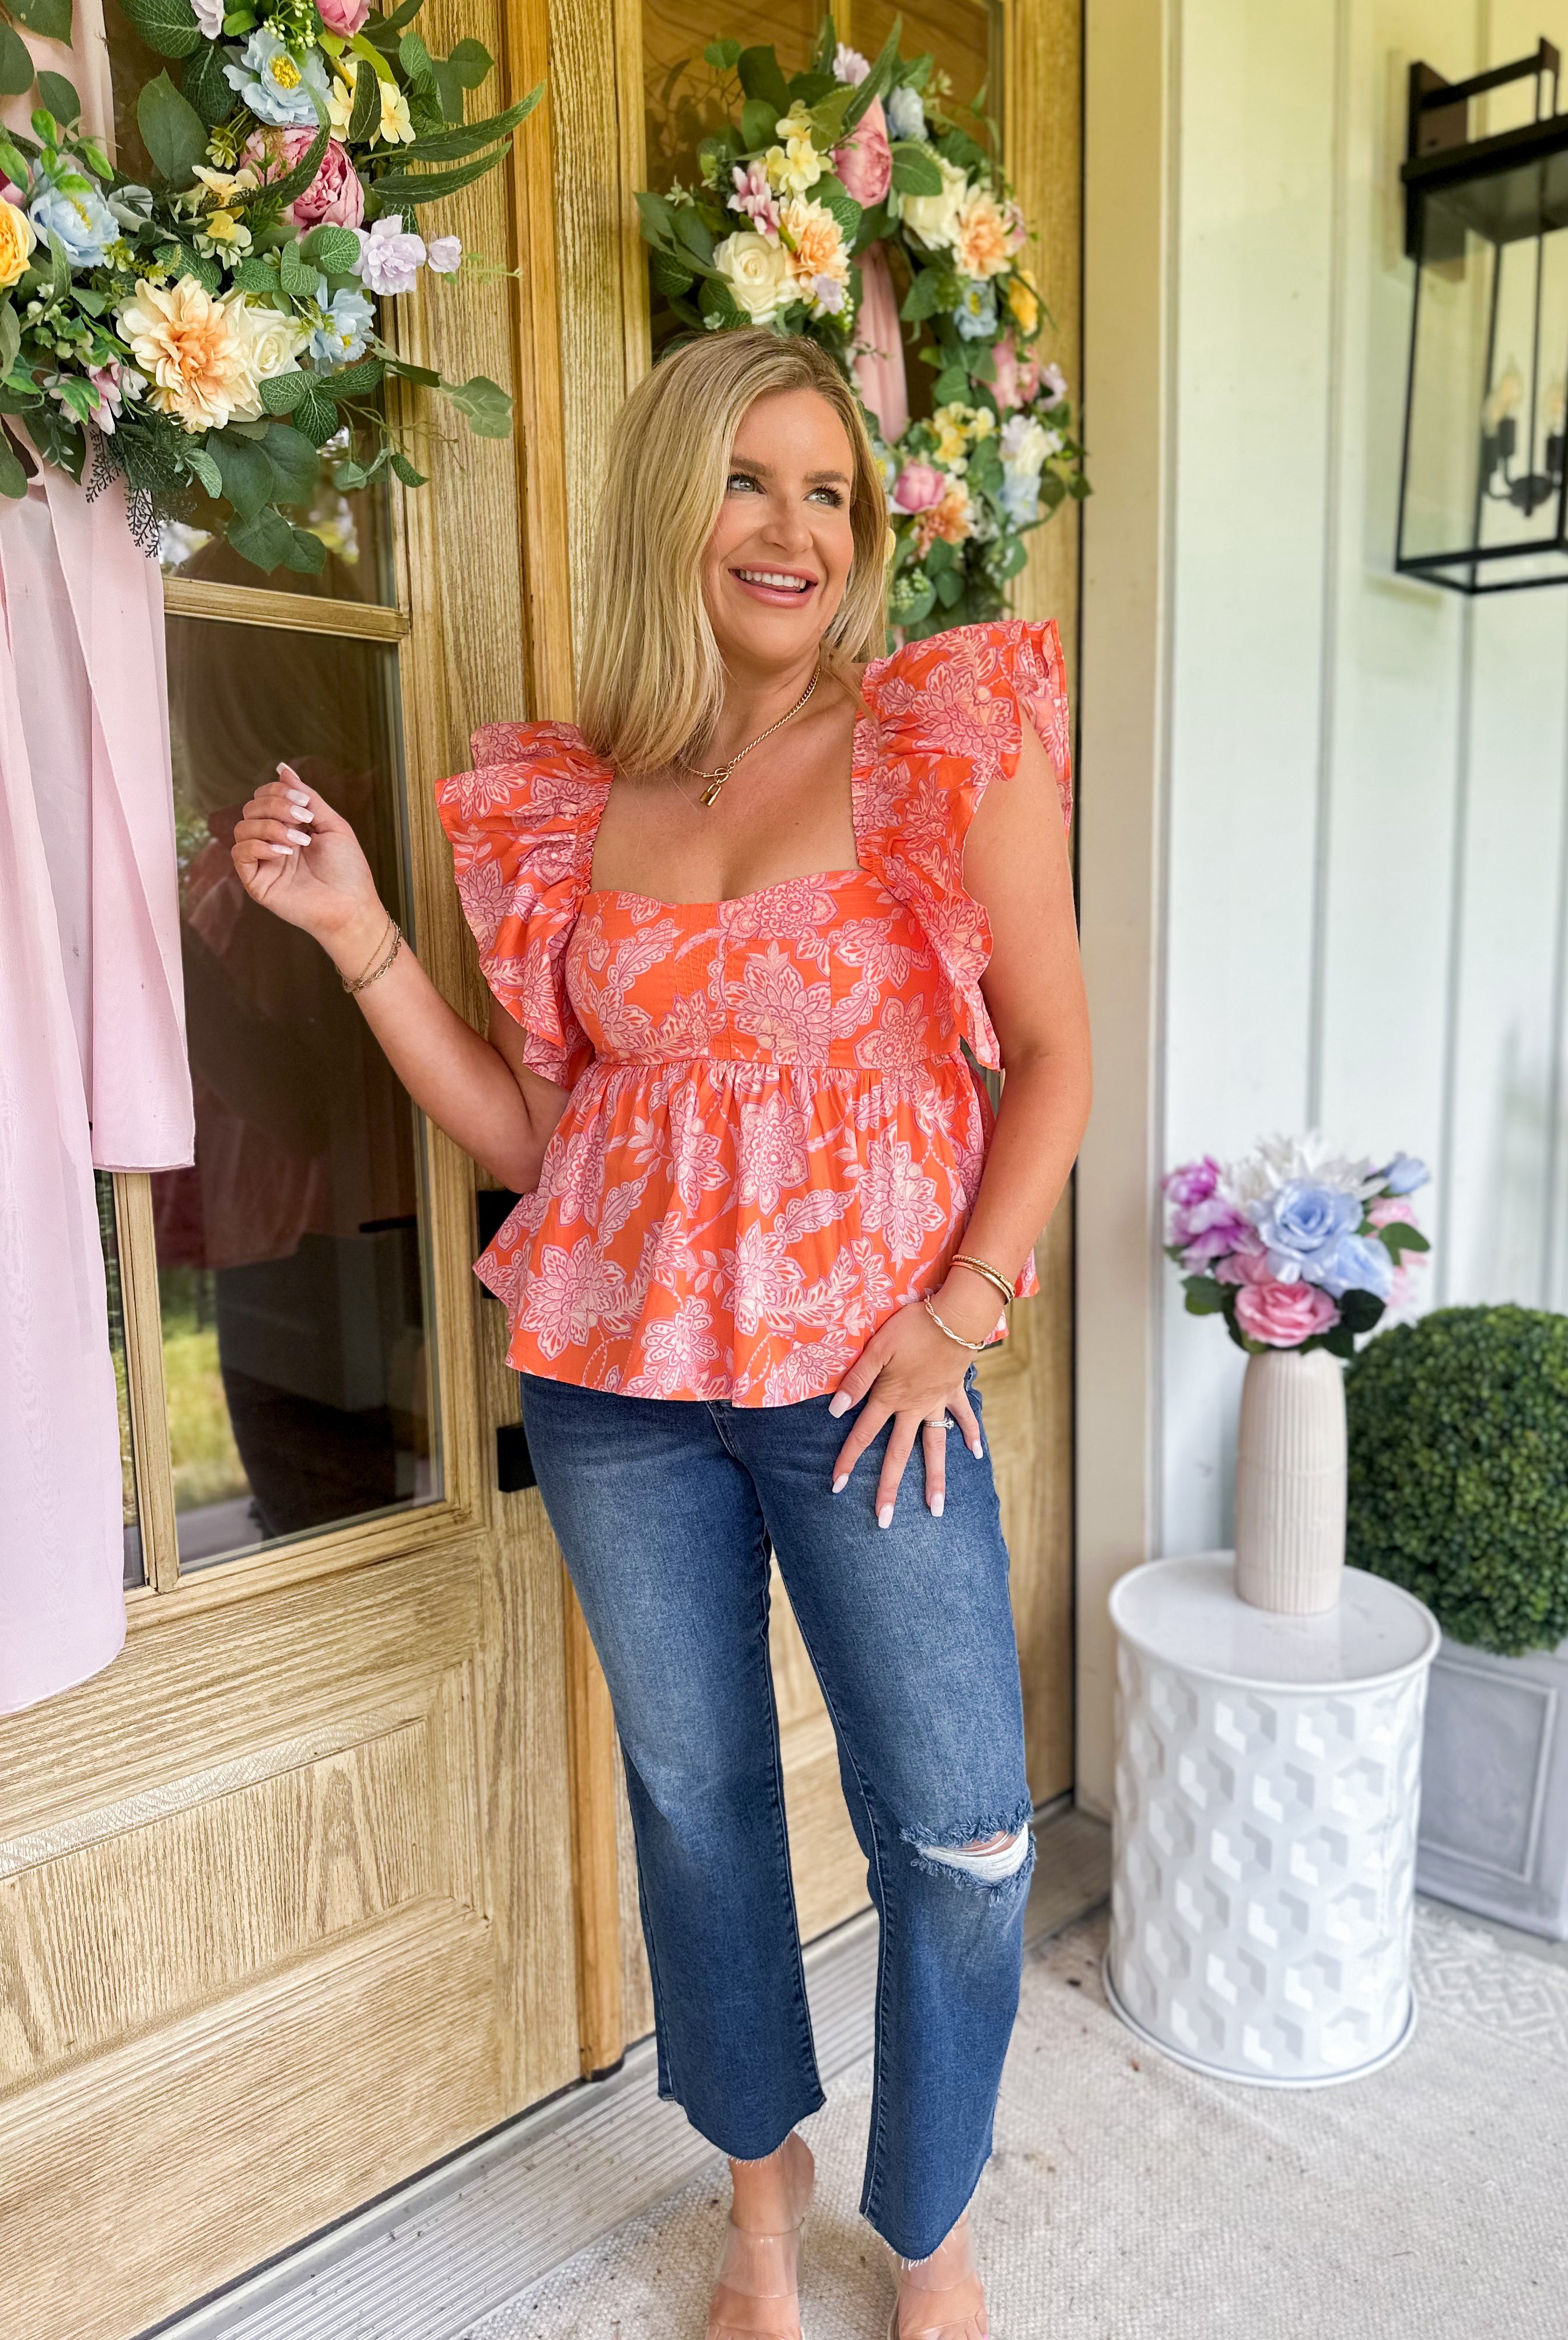 Arianna Orange Floral Square Neck Babydoll Ruffle Top - Be You Boutique